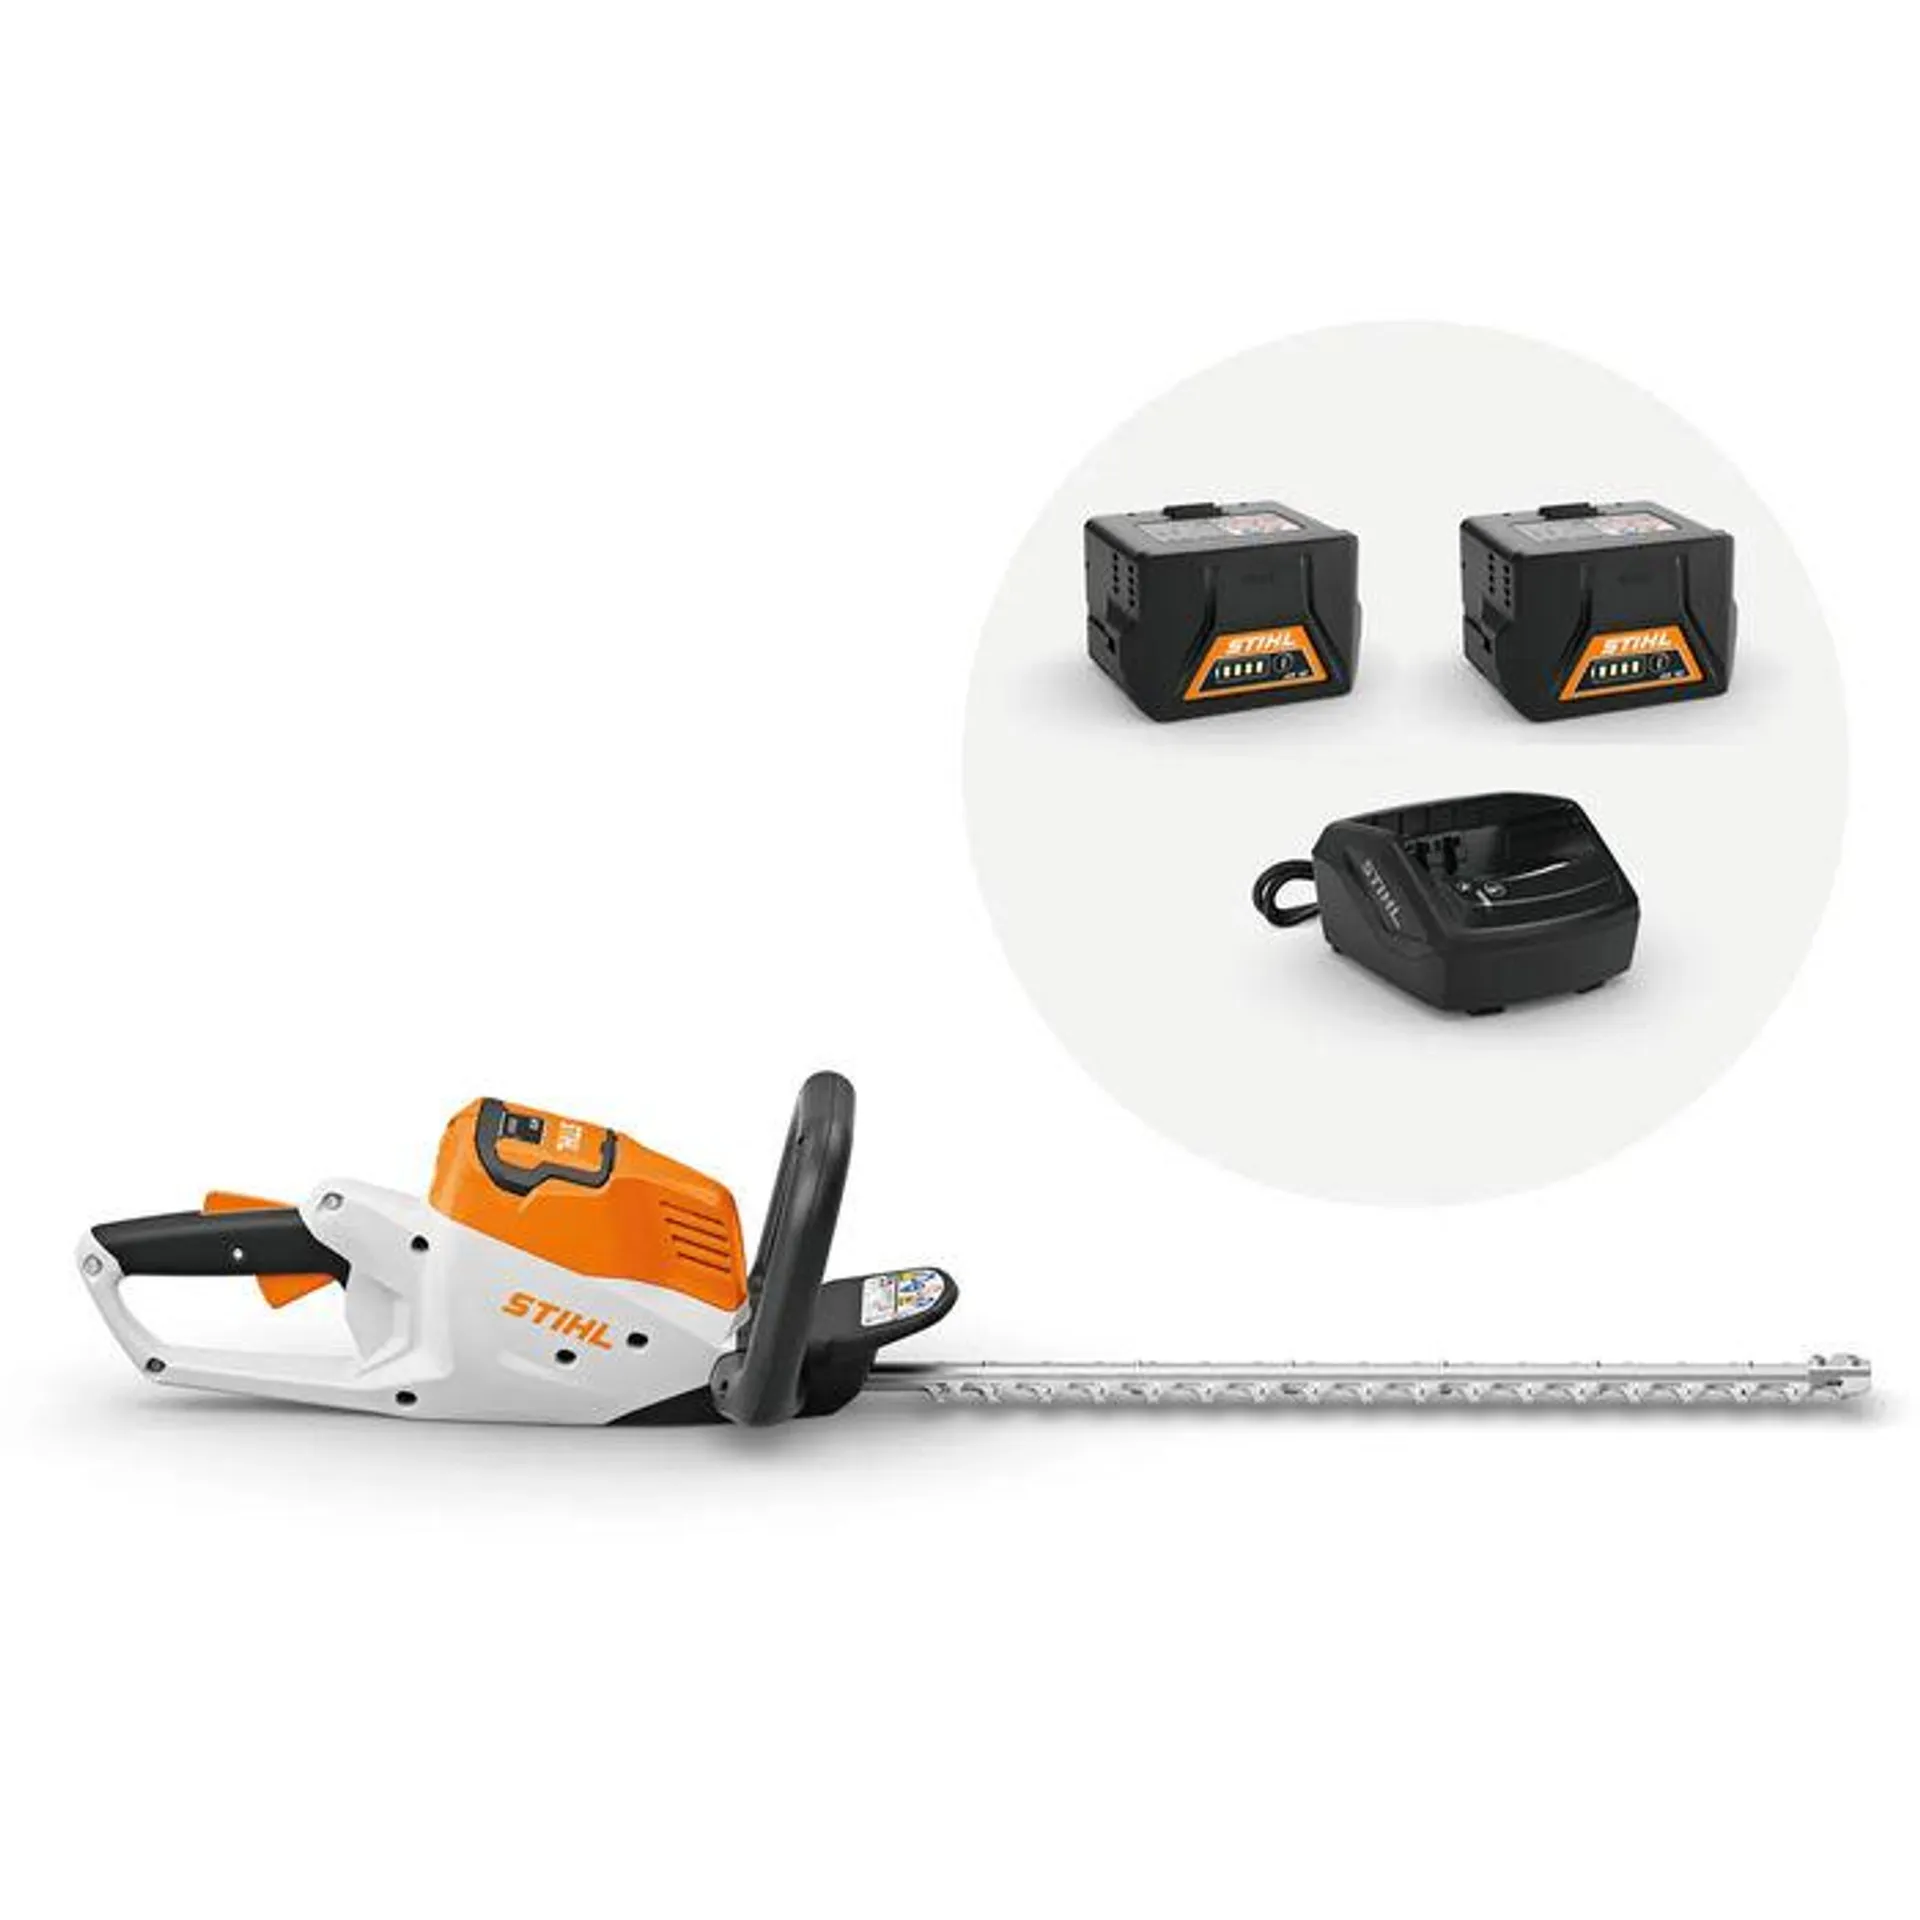 STIHL HSA 50 Battery Hedgetrimmer Kit With Free second Battery